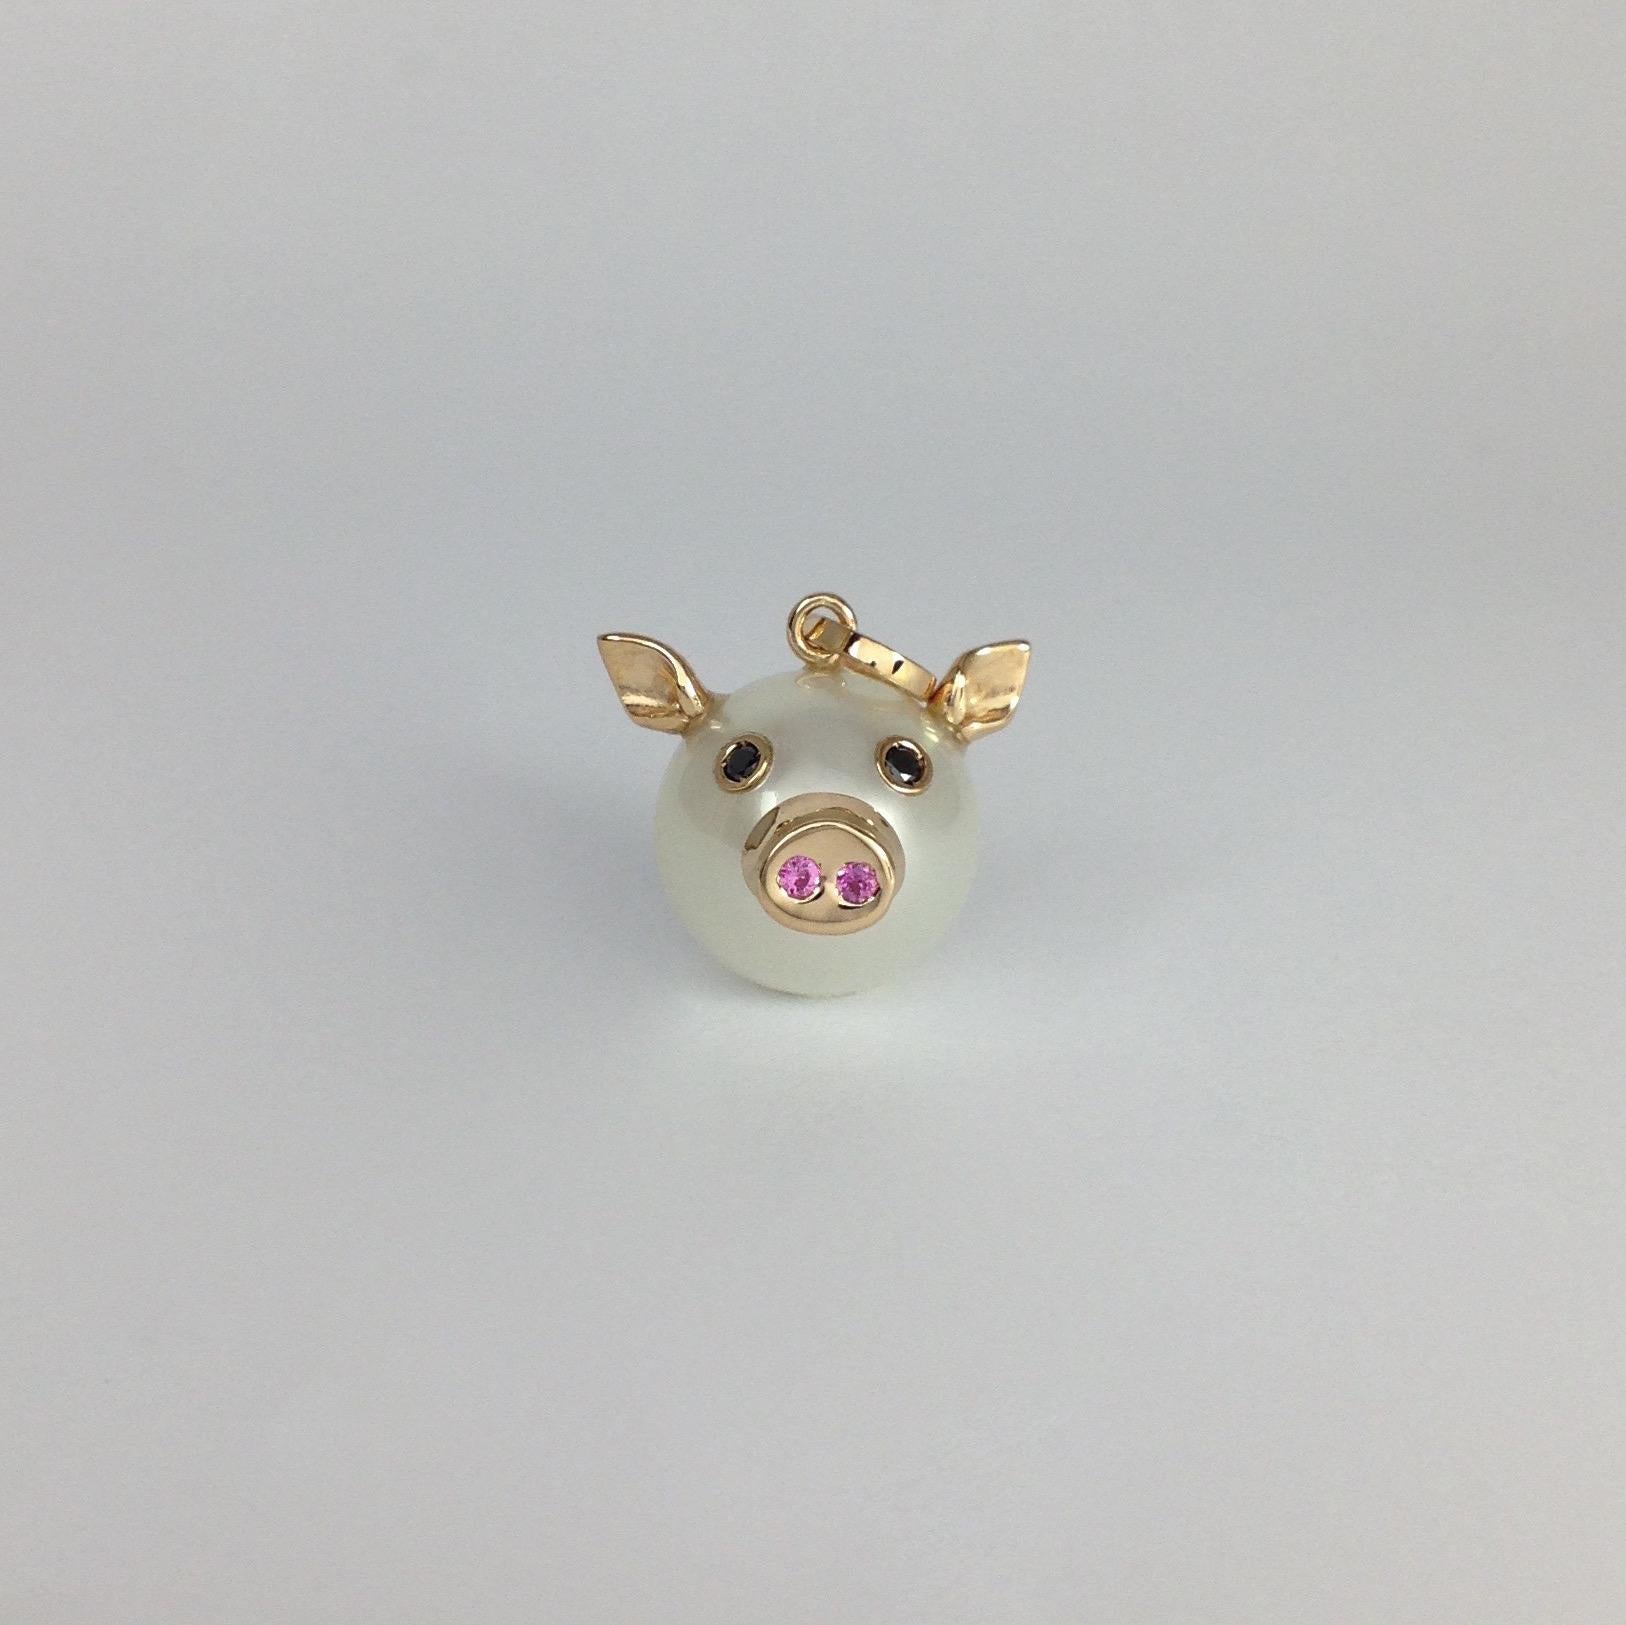 This nice pendant is made with a button Australian pearl. 
It has two ears, two eyes with black diamonds.  
In the holes of its nose there are two pink sapphires encrusted, in total ct 0.03.
All the particulars made in red gold.
The diamonds are in